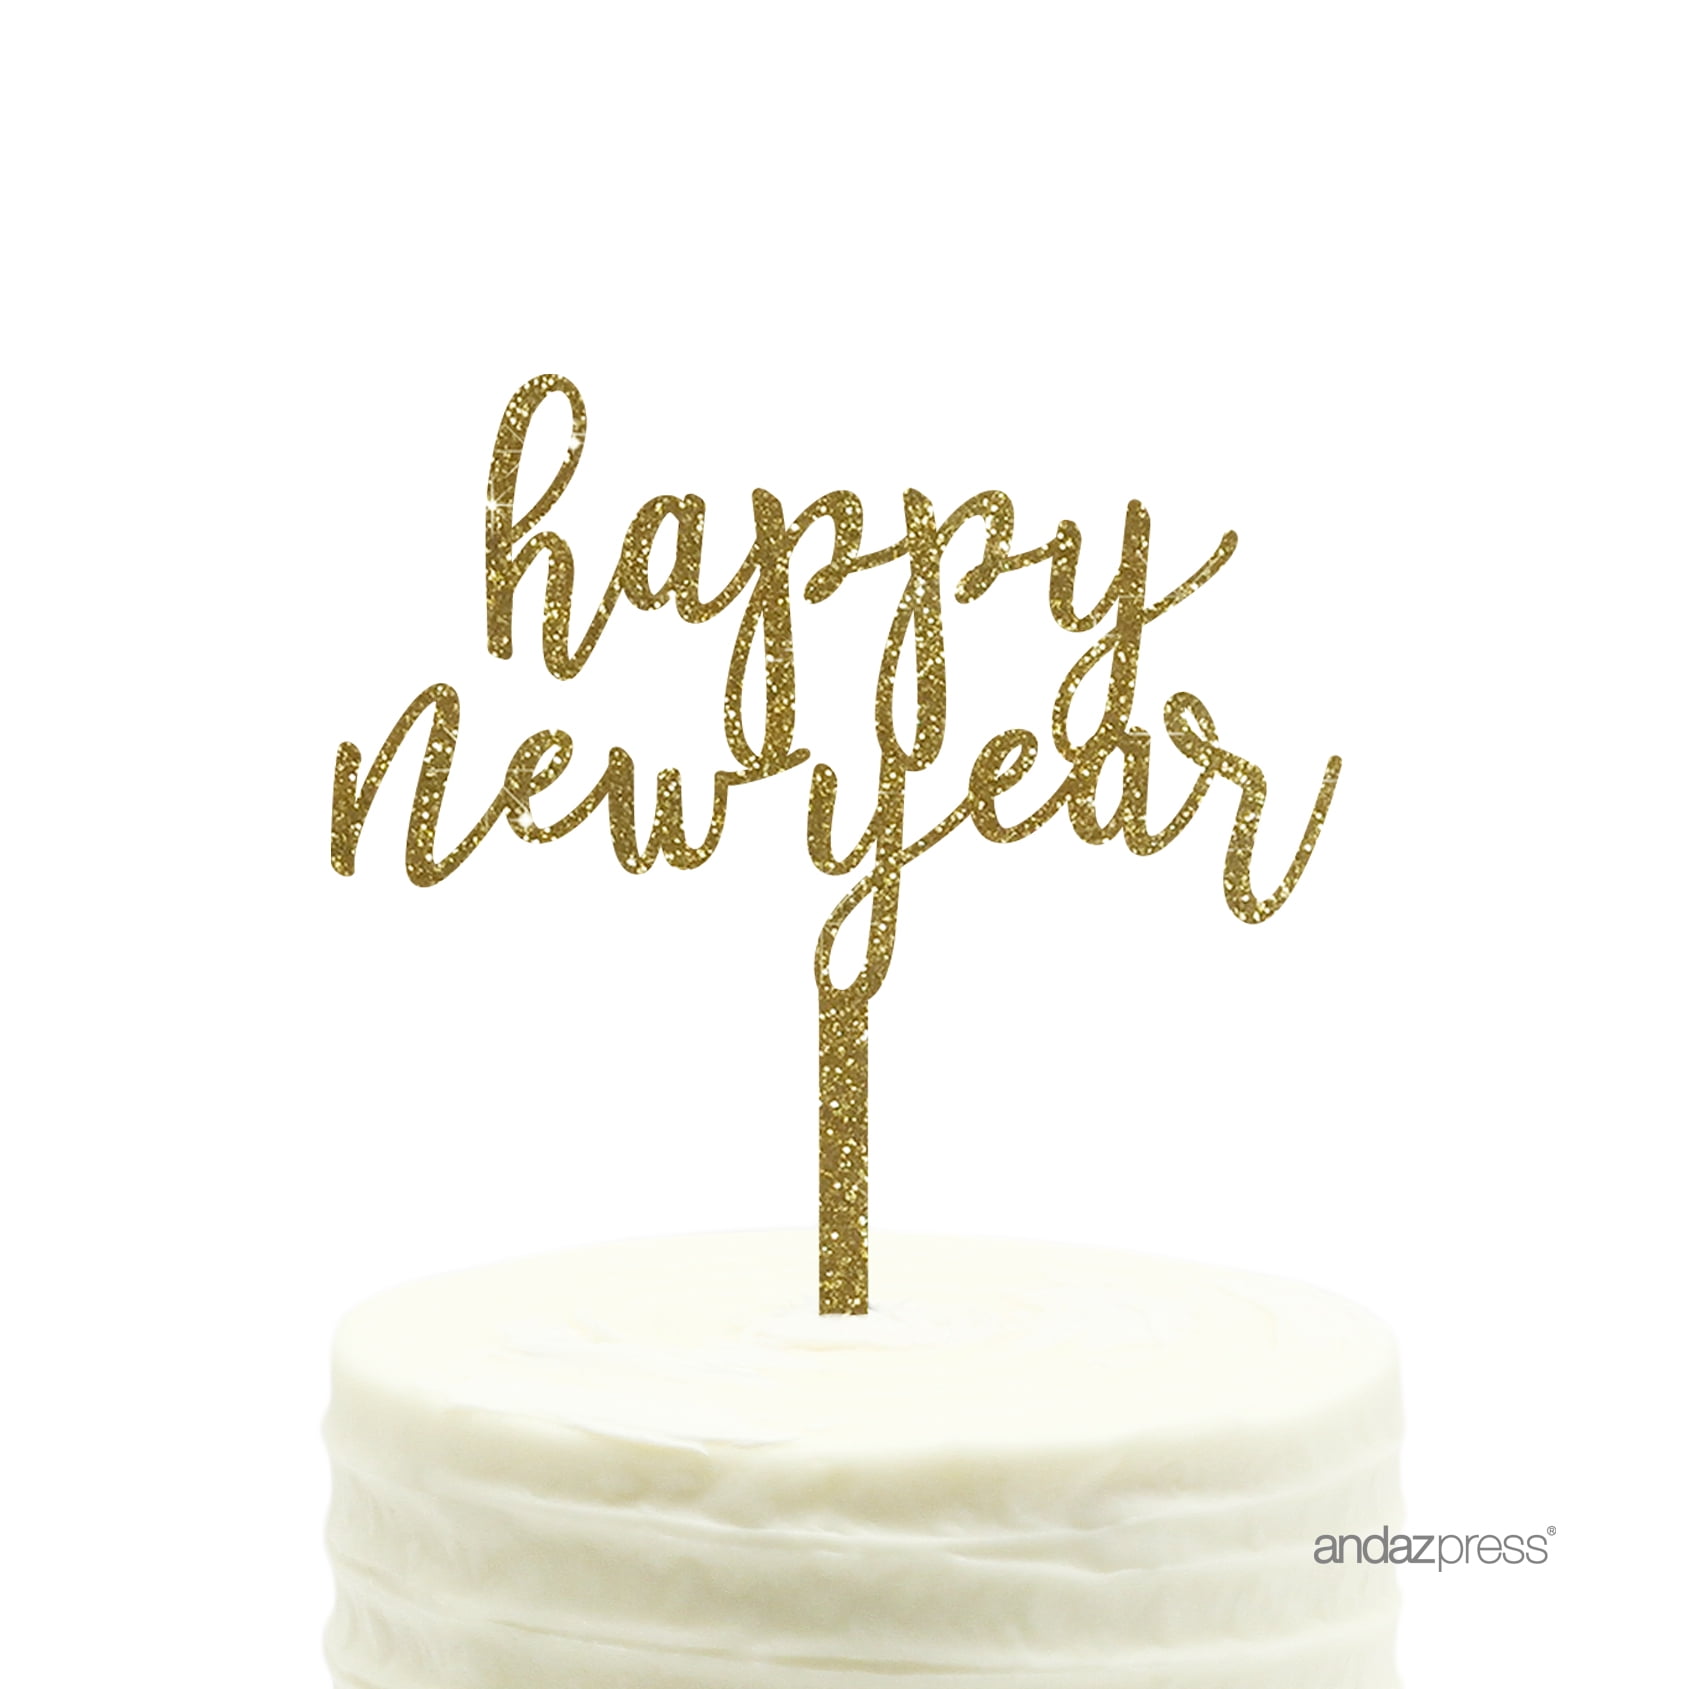 Gold Glitter Cheers to 2020 Cake Topper Happy New Year Party Decorations Hello 2020 Cake Toppers 